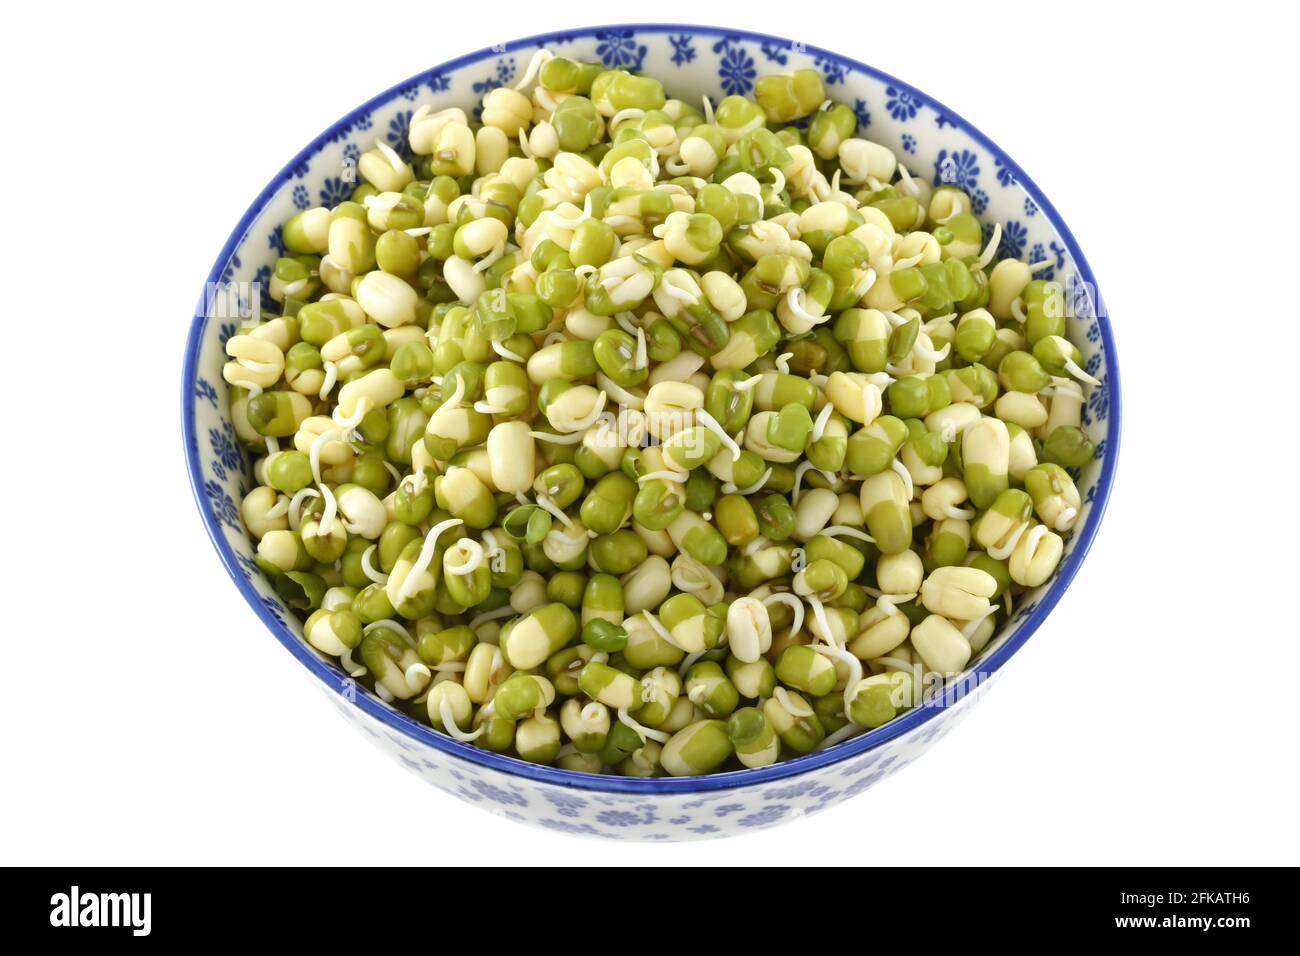 Soaked Mung Bean Green gram sprouts with green skins Stock Photo